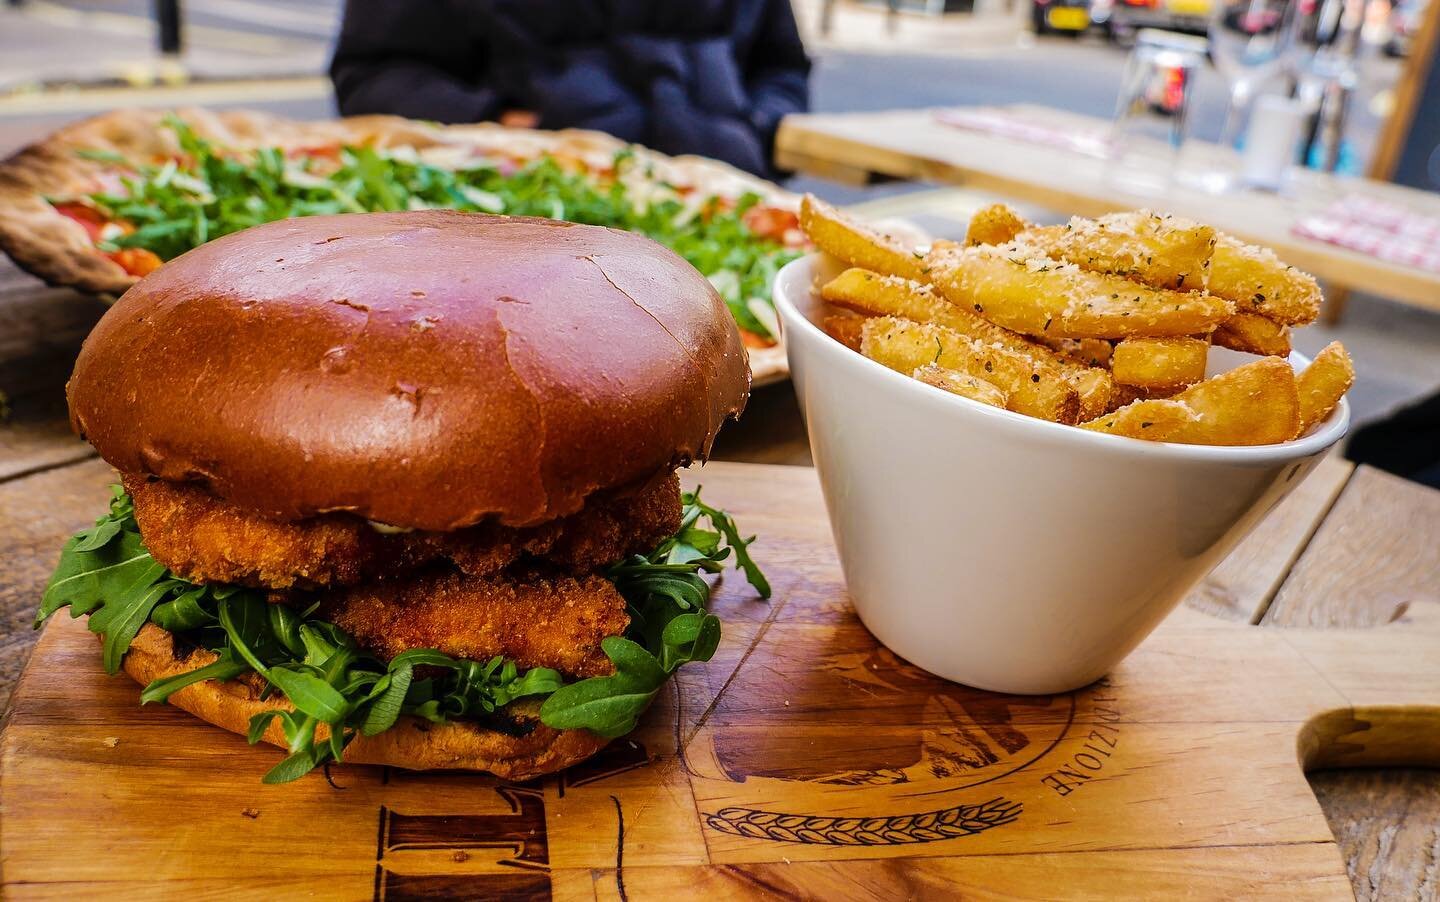 Have you tried our Chicken Milanese Burger yet? Crispy and topped with lemon mayo - perfect with parmigiano chips! 
.
.
.
.
.
.

#eeeeeats #timeoutlondon #fooding #londonlife #londonfood #londonfoodie #londoneats #goingoutlondon #golondonfood #pretty